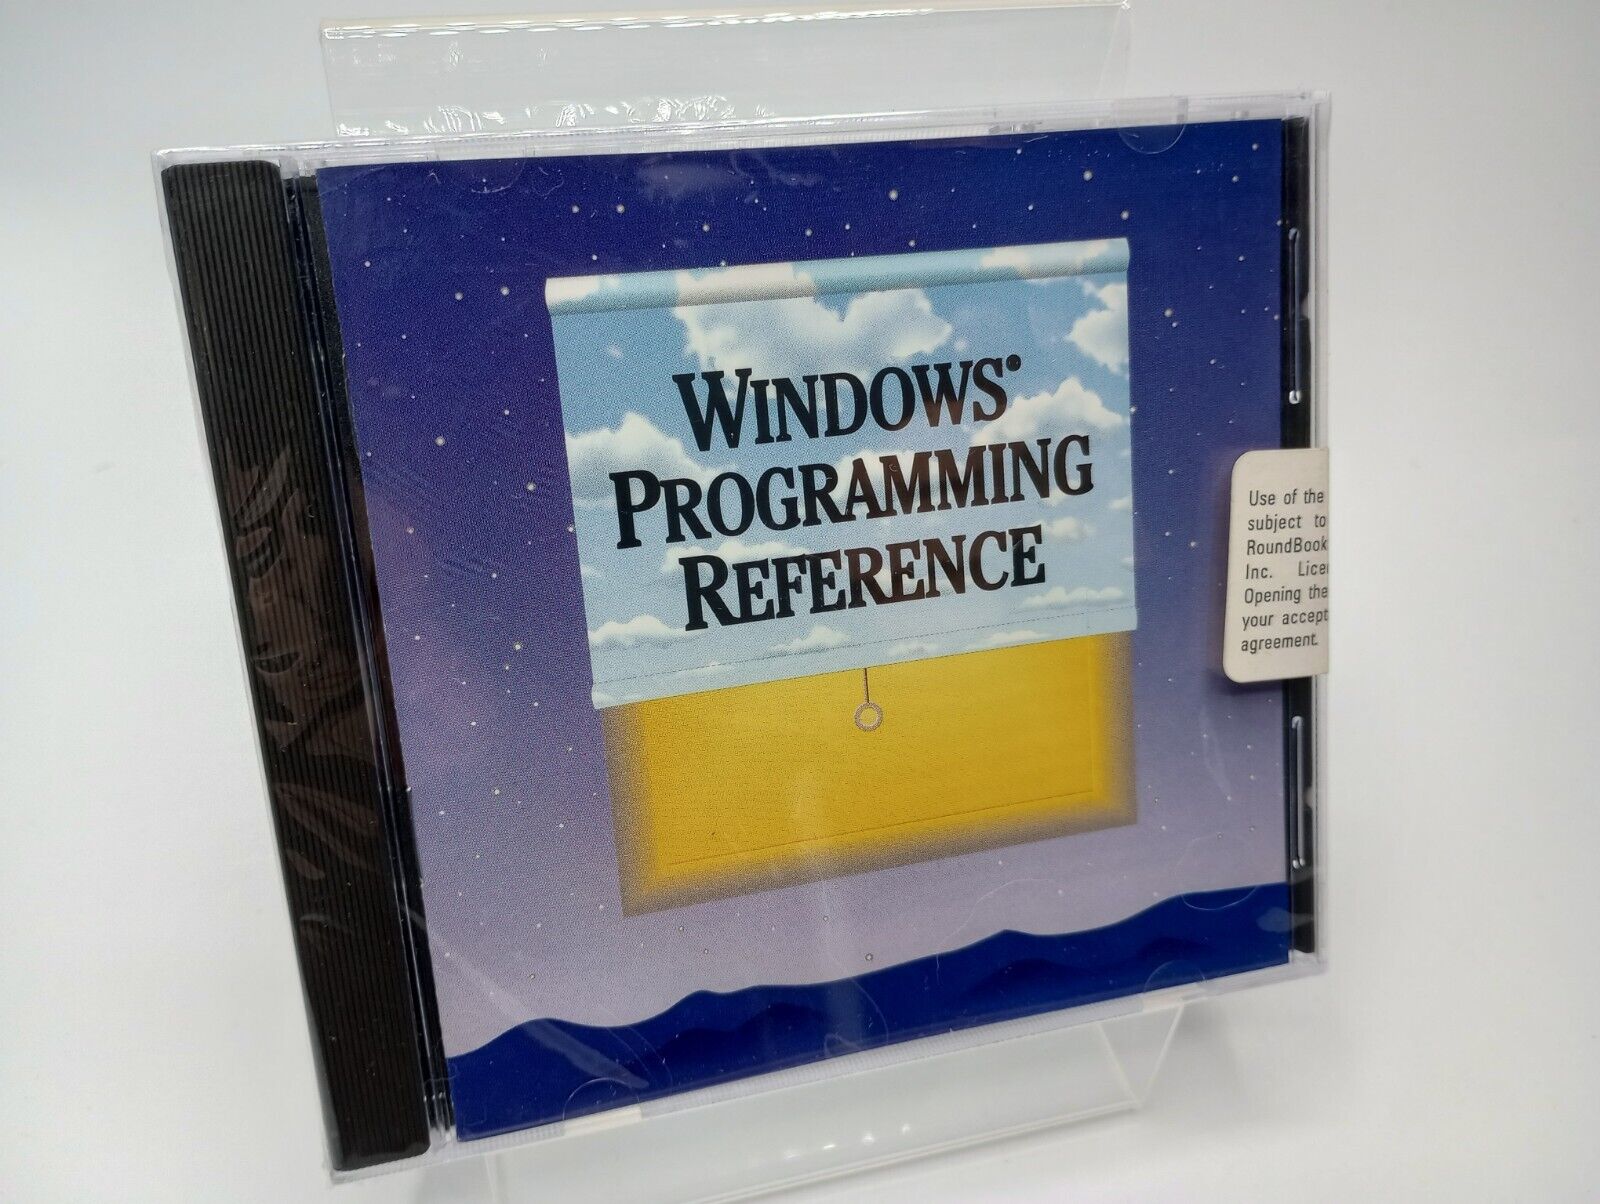 Vintage Windows Programming Reference CD-ROM (1993) for Windows 3.1 - NEW/SEALED